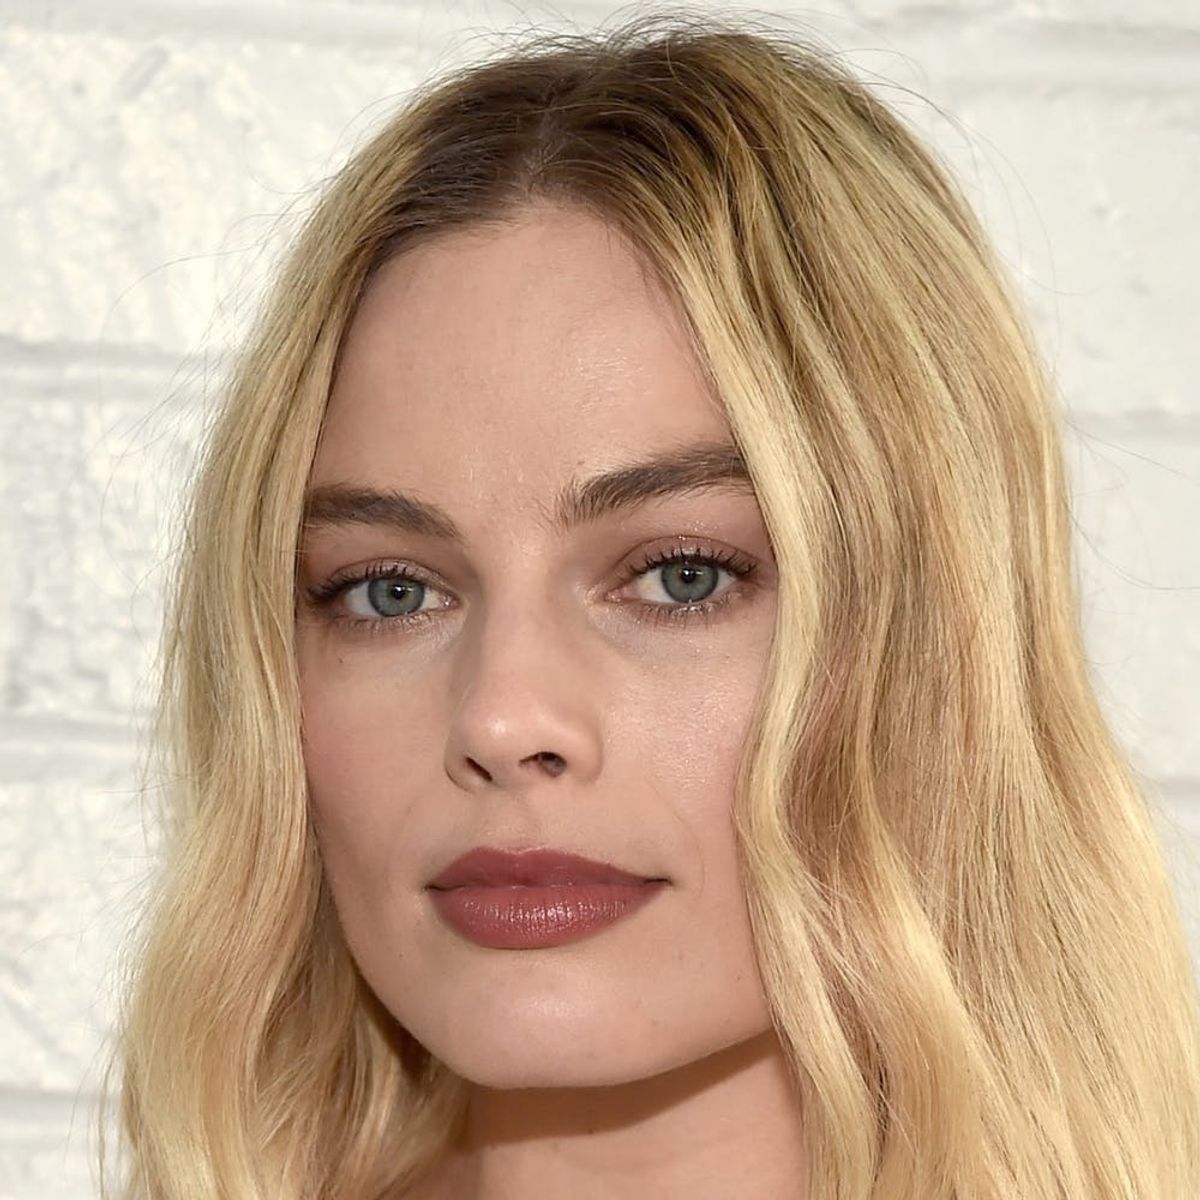 Margot Robbie’s Reasoning for Only Wearing Her Wedding Ring on the Weekends Makes Total Sense